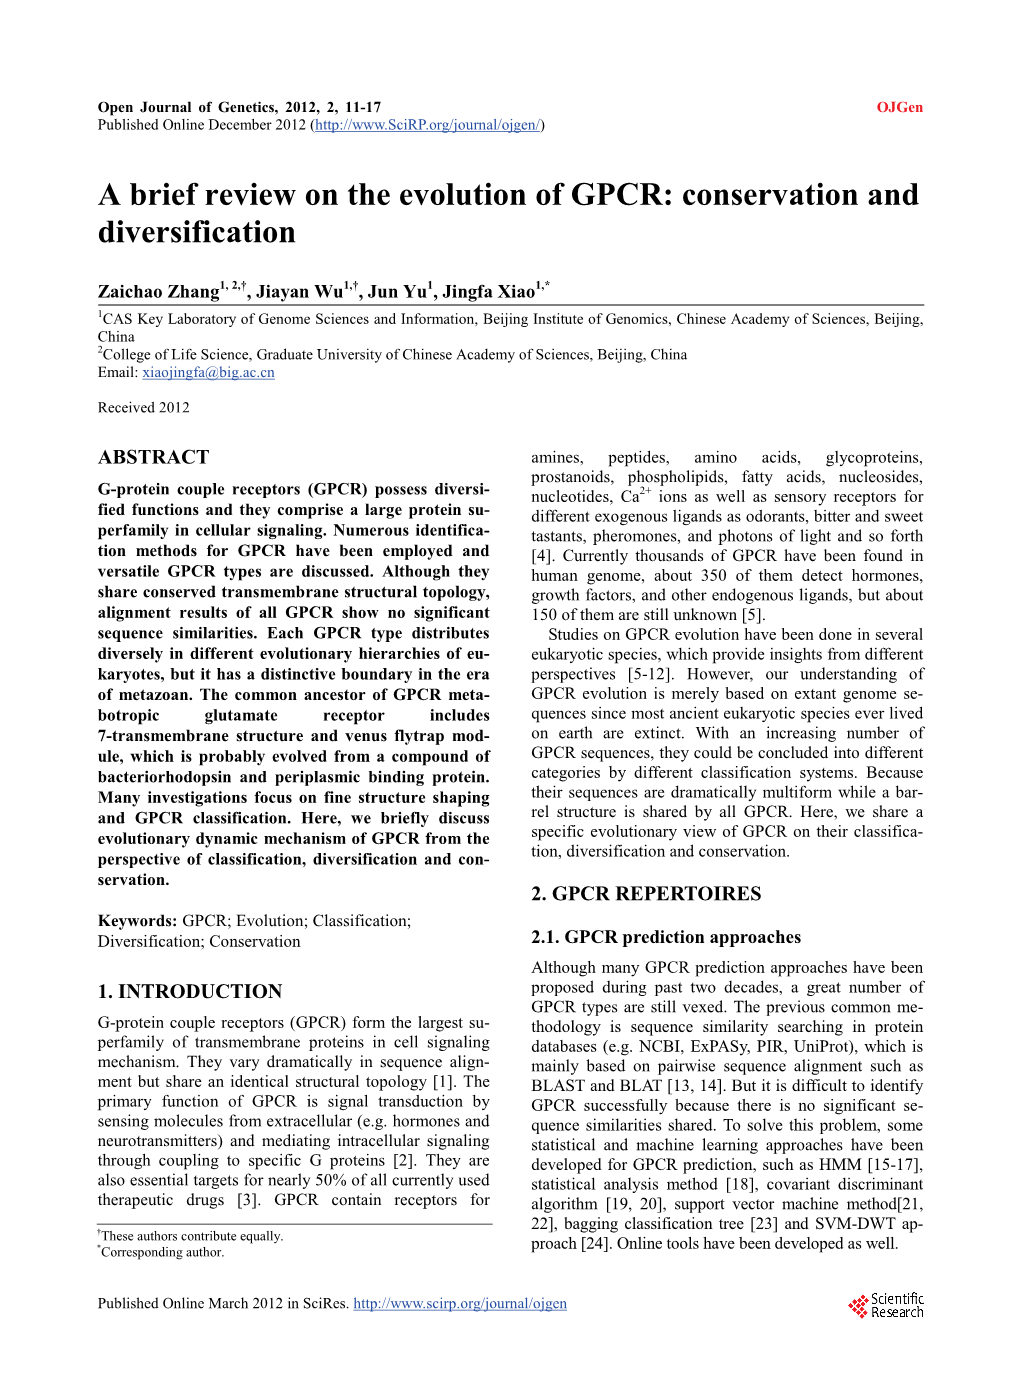 A Brief Review on the Evolution of GPCR: Conservation and Diversification